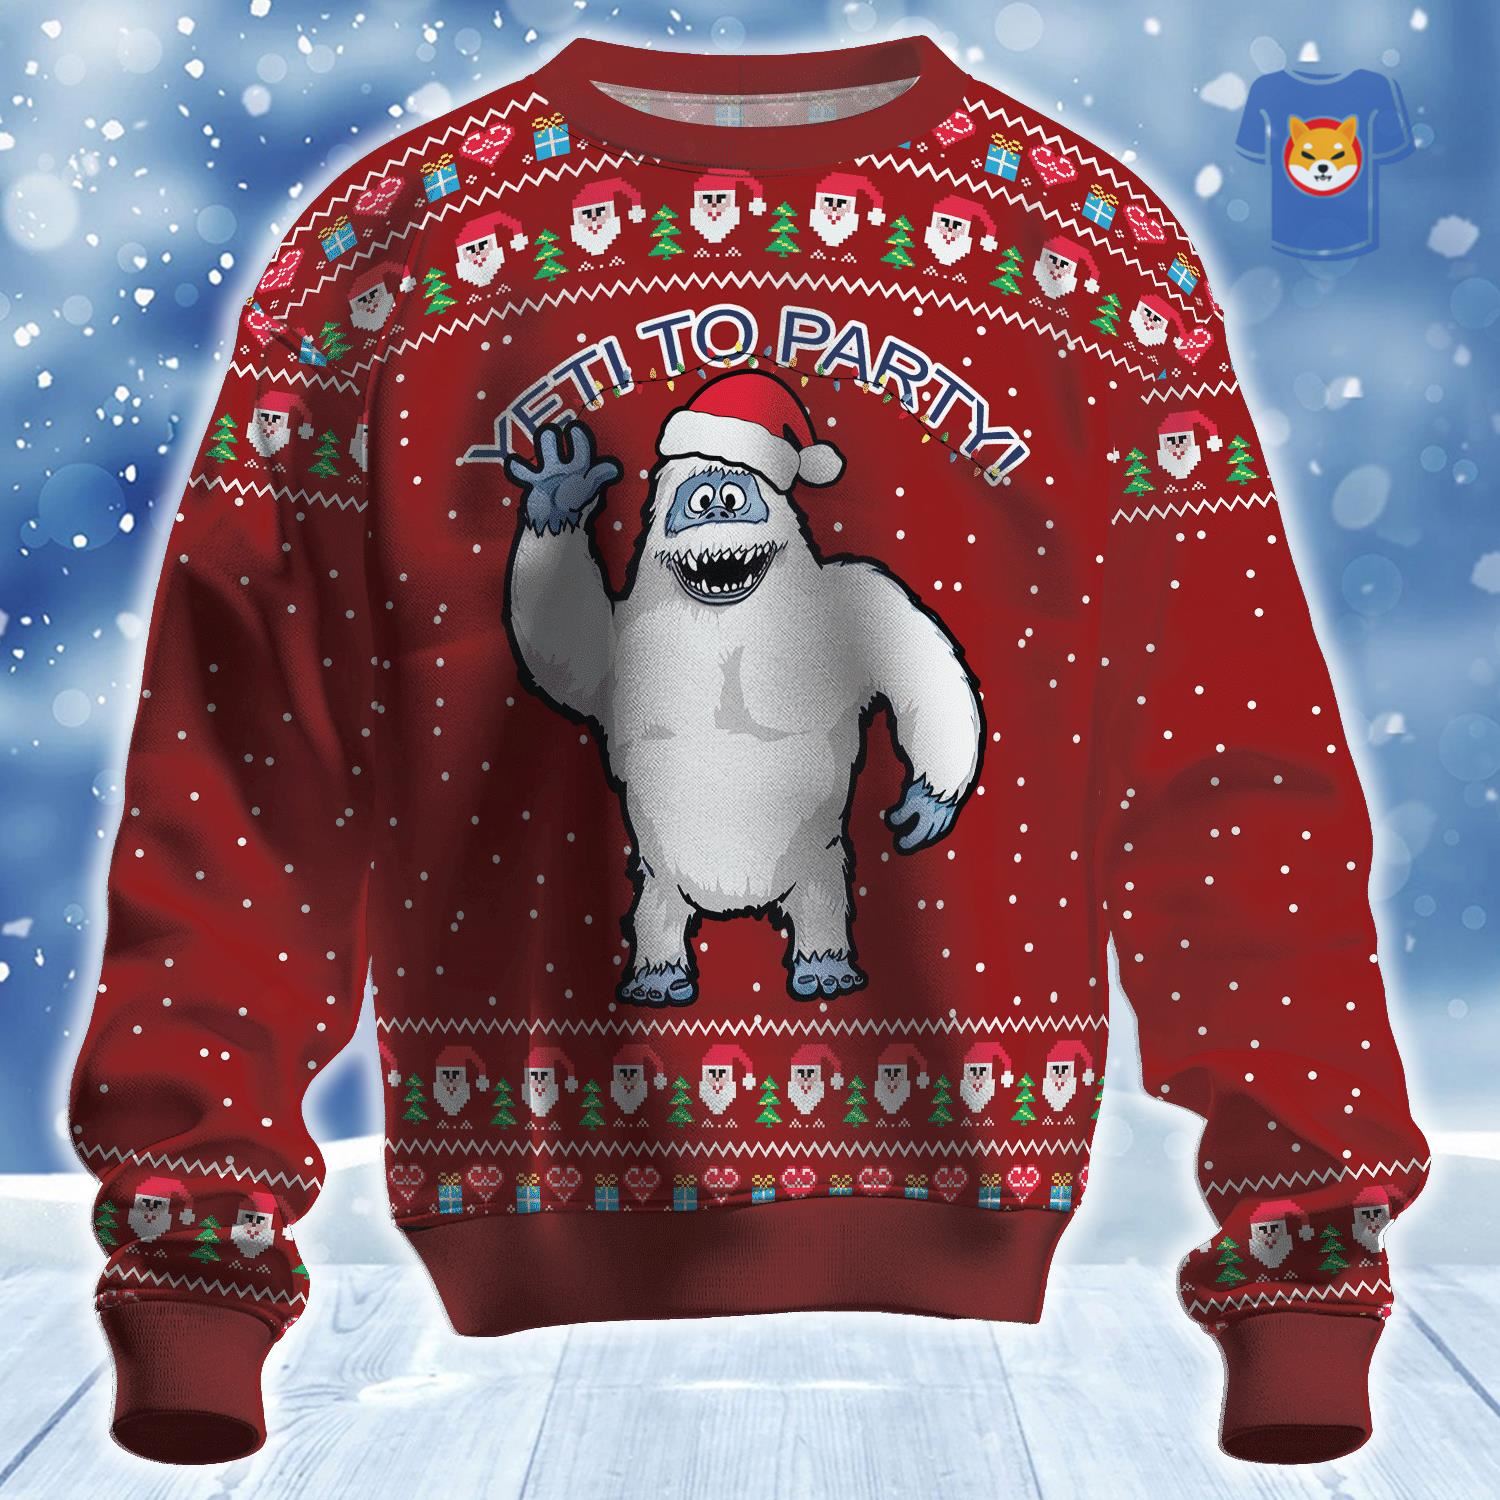 Yeti To Party Ugly Christmas Sweater 